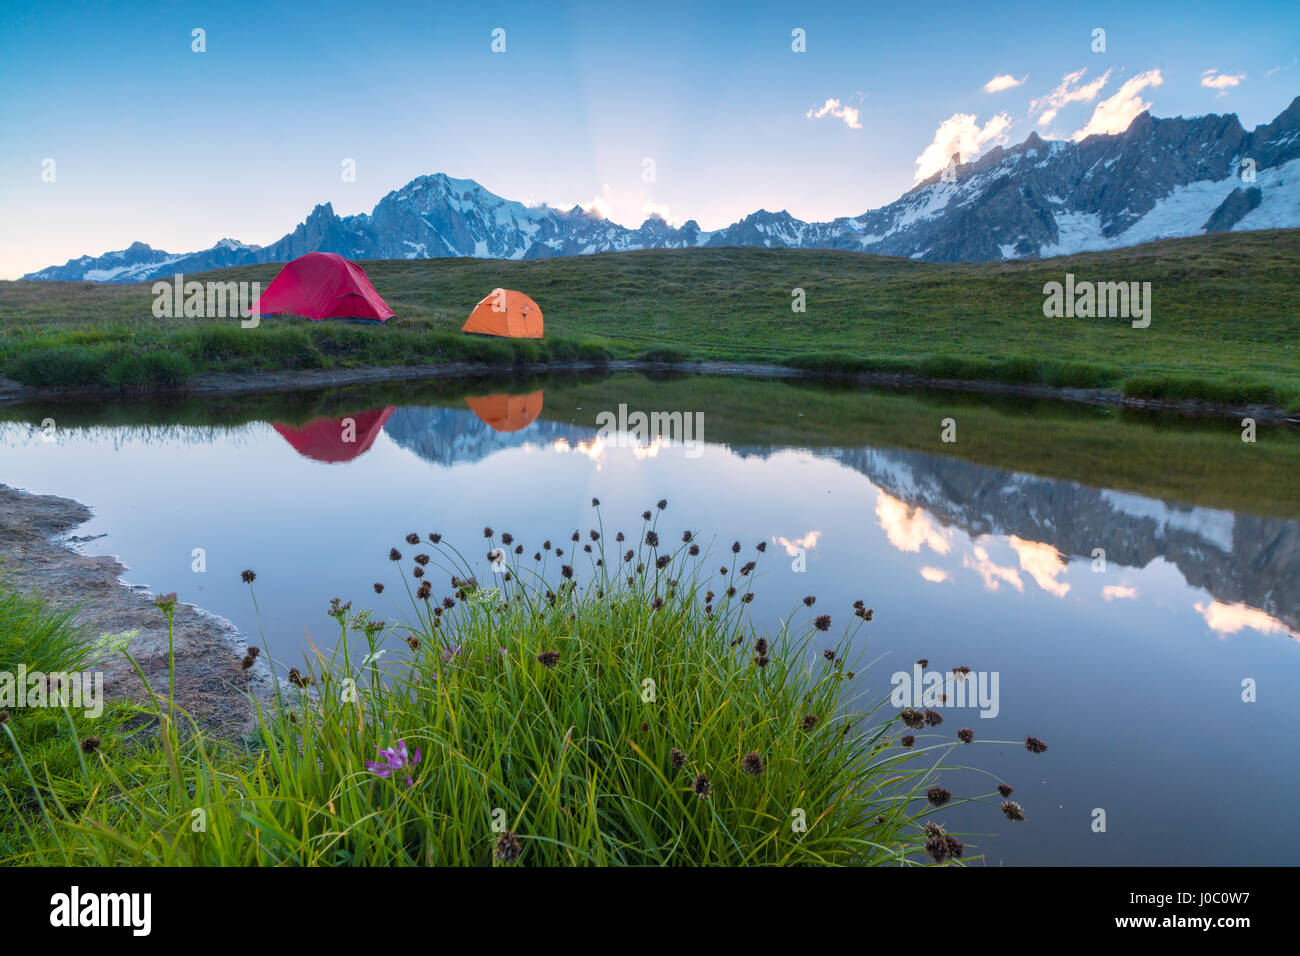 Camping tents in the green meadows surrounded by flowers and alpine lake, Mont De La Saxe, Courmayeur, Aosta Valley, Italy Stock Photo